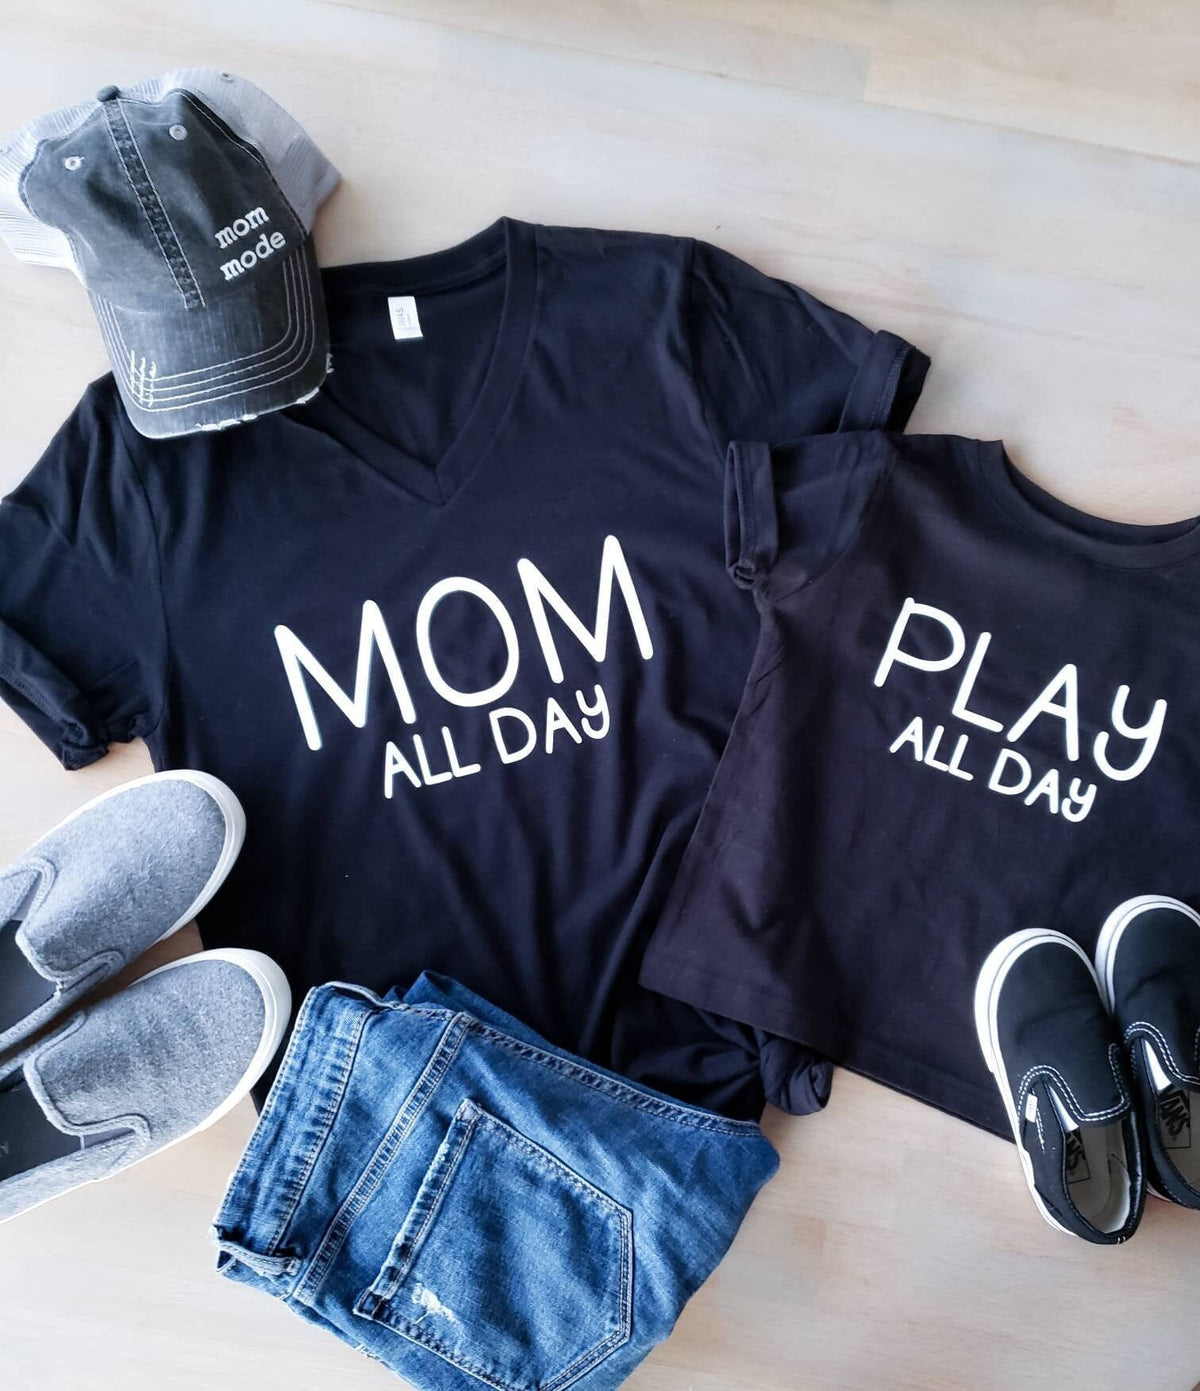 Mom All Day Play All Day • Mommy and Me Shirts - 